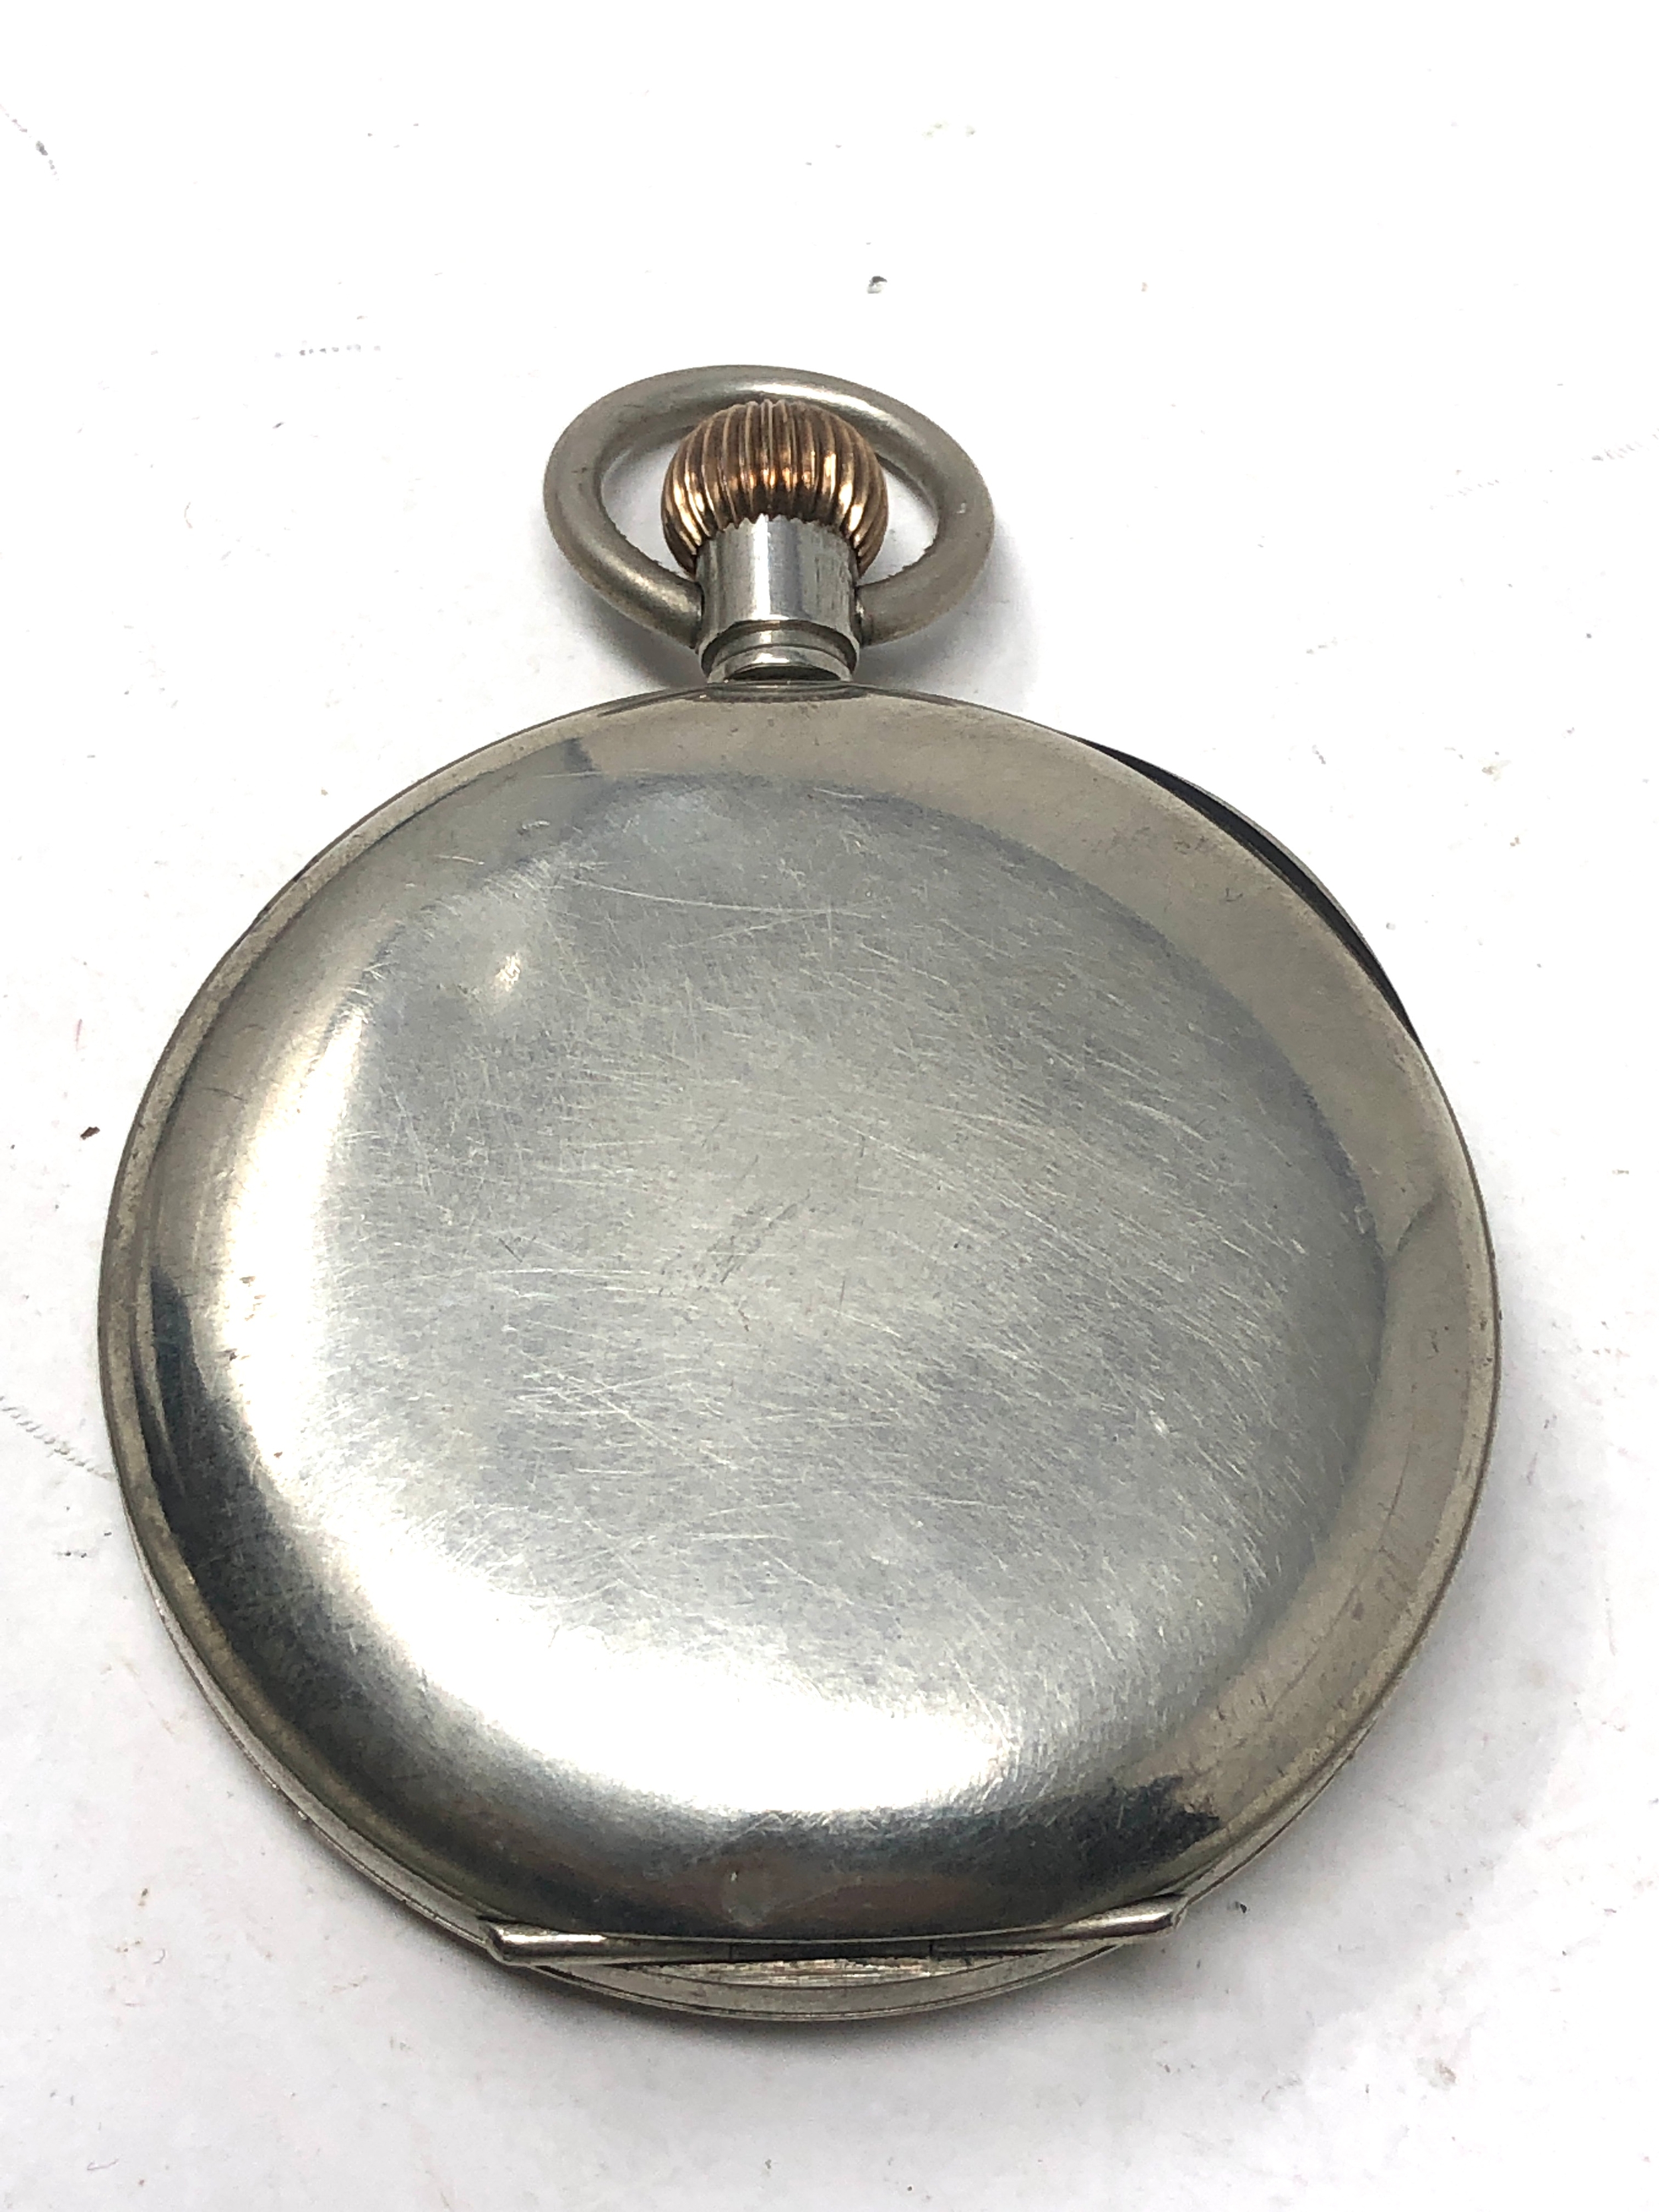 Antique open face pocket watch omega the watch is not ticking - Image 2 of 3